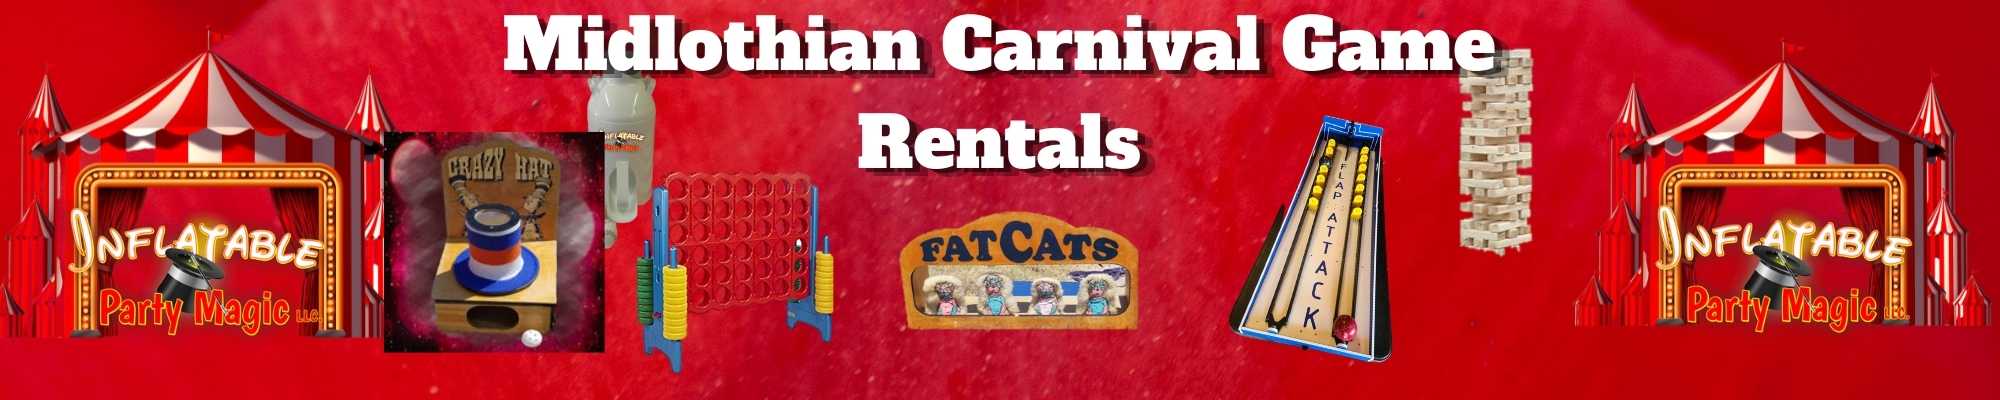 Midlothian Carnival Game and Giant Backyard Game Rentals